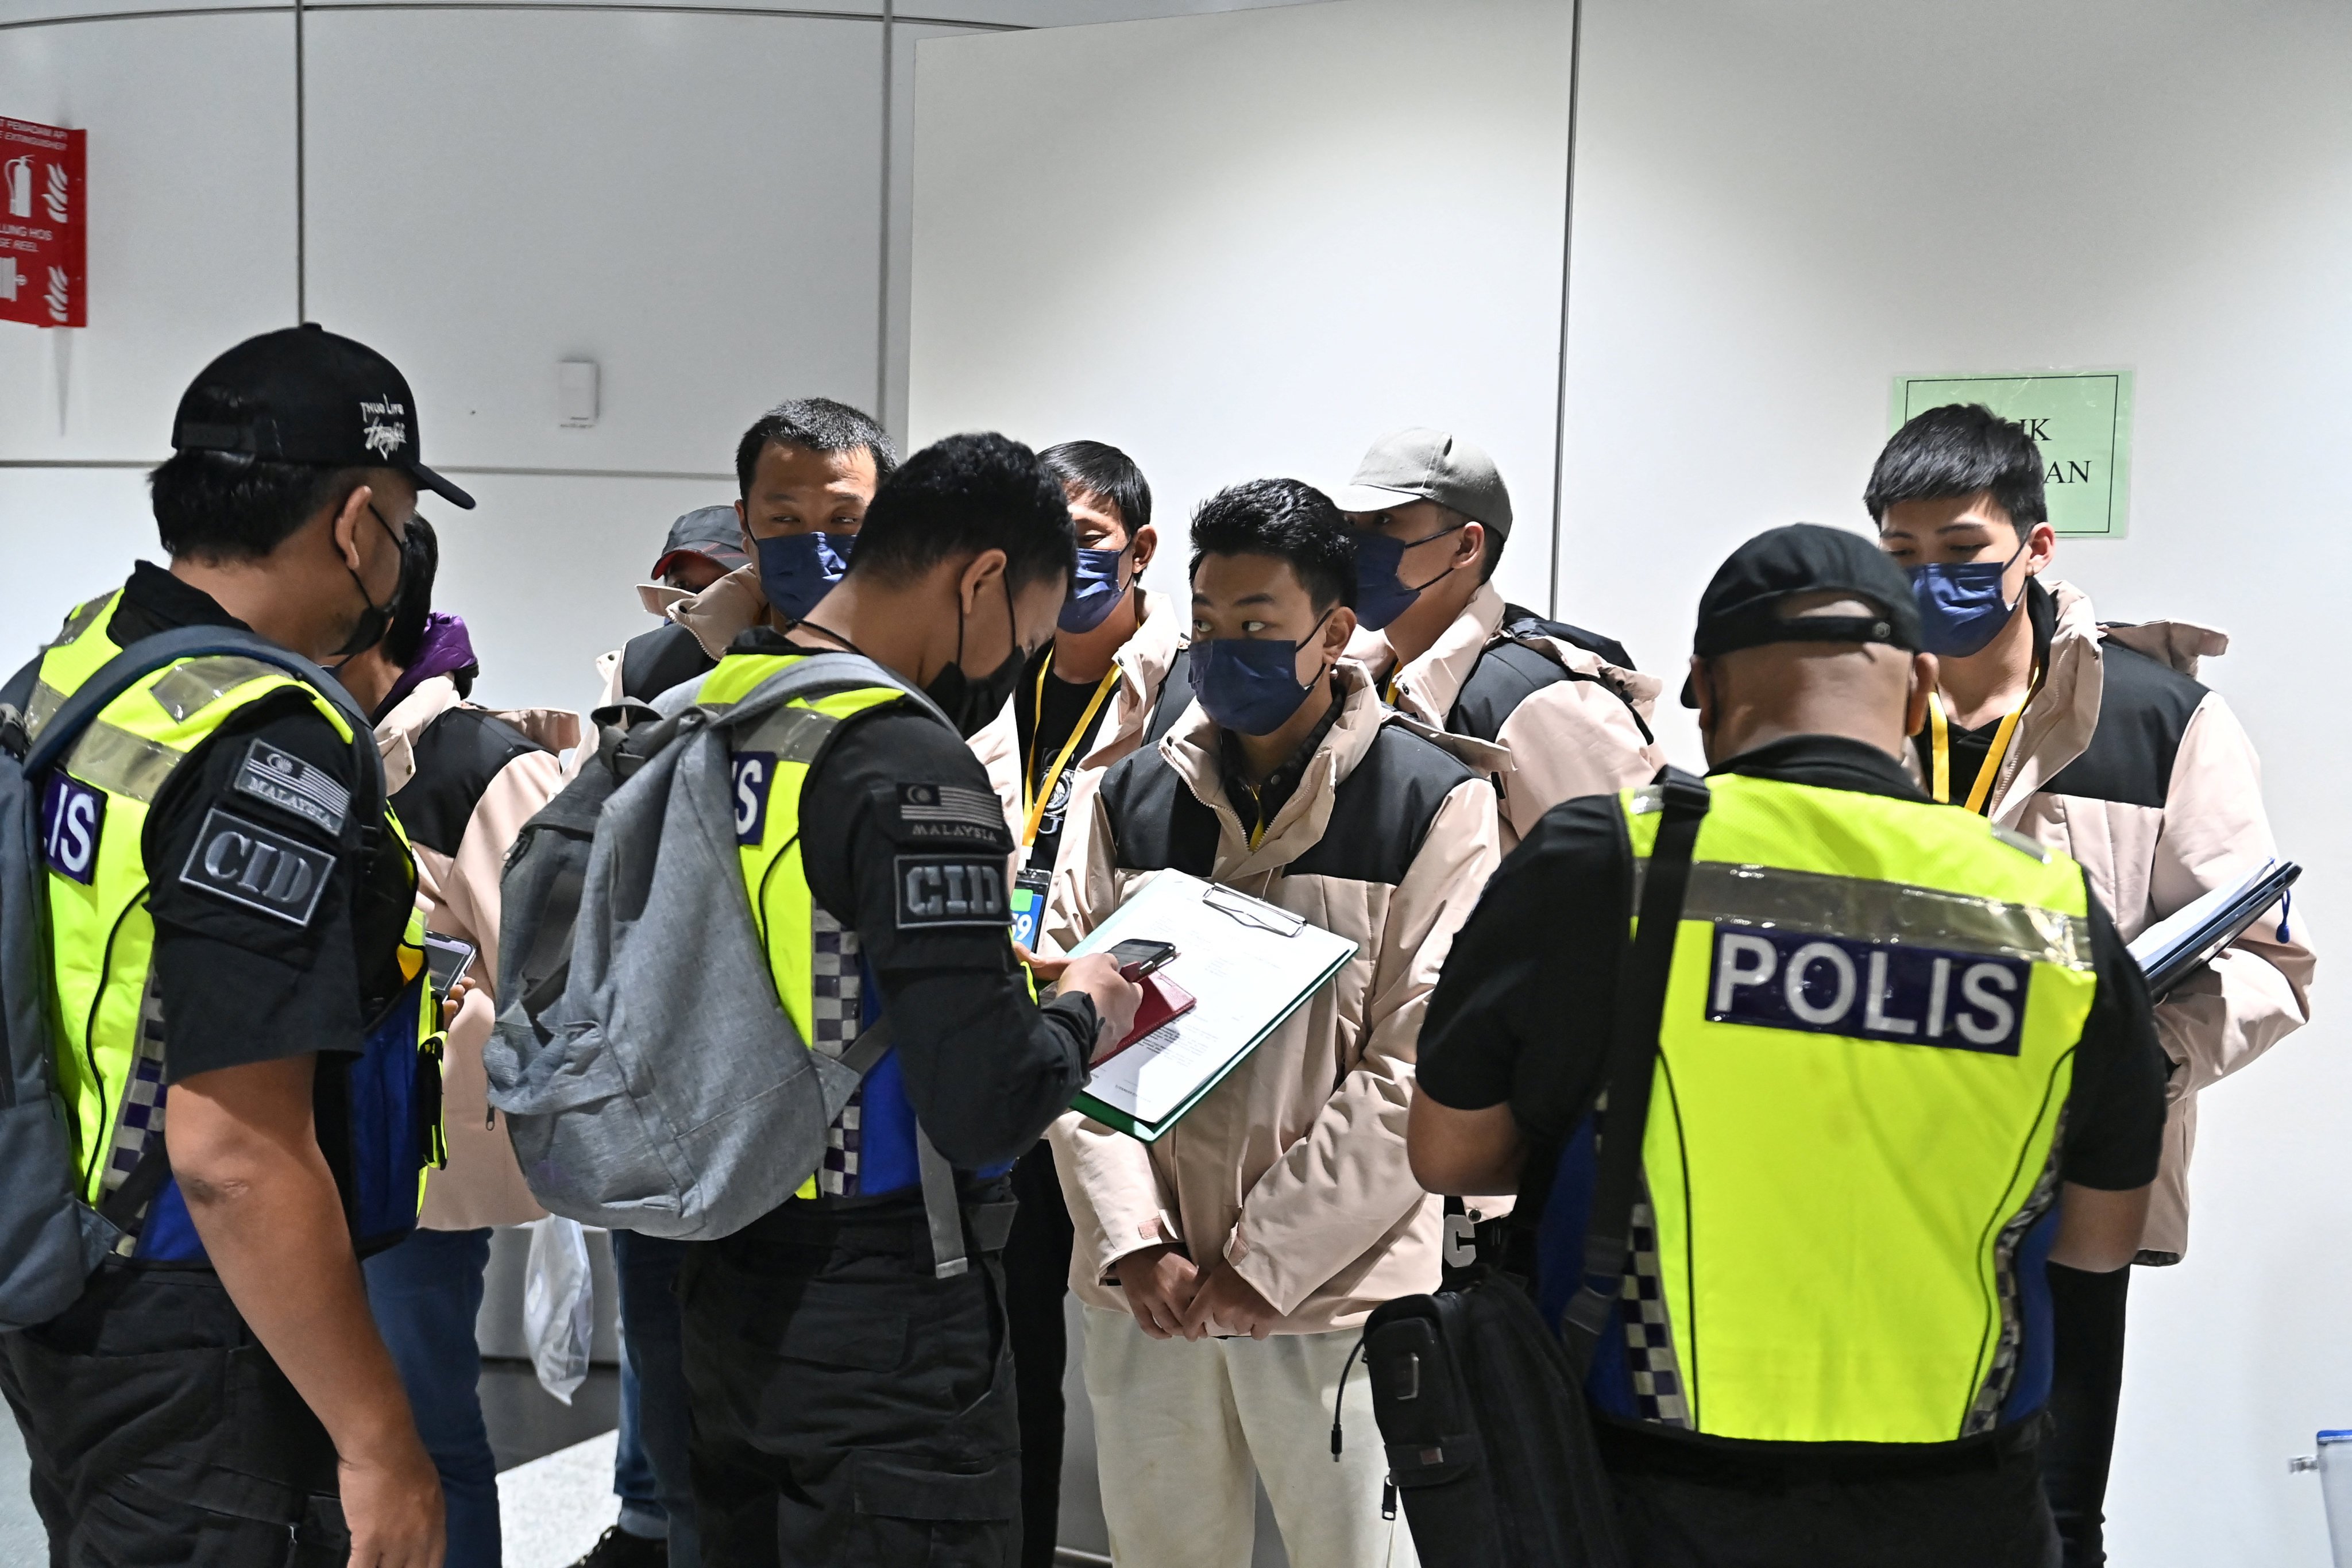 Police officers speak to some of the Malaysian job scam victims after they arrived in Kuala Lumpur on Friday. Photo: Malaysia’s Ministry of Foreign Affairs via Reuters